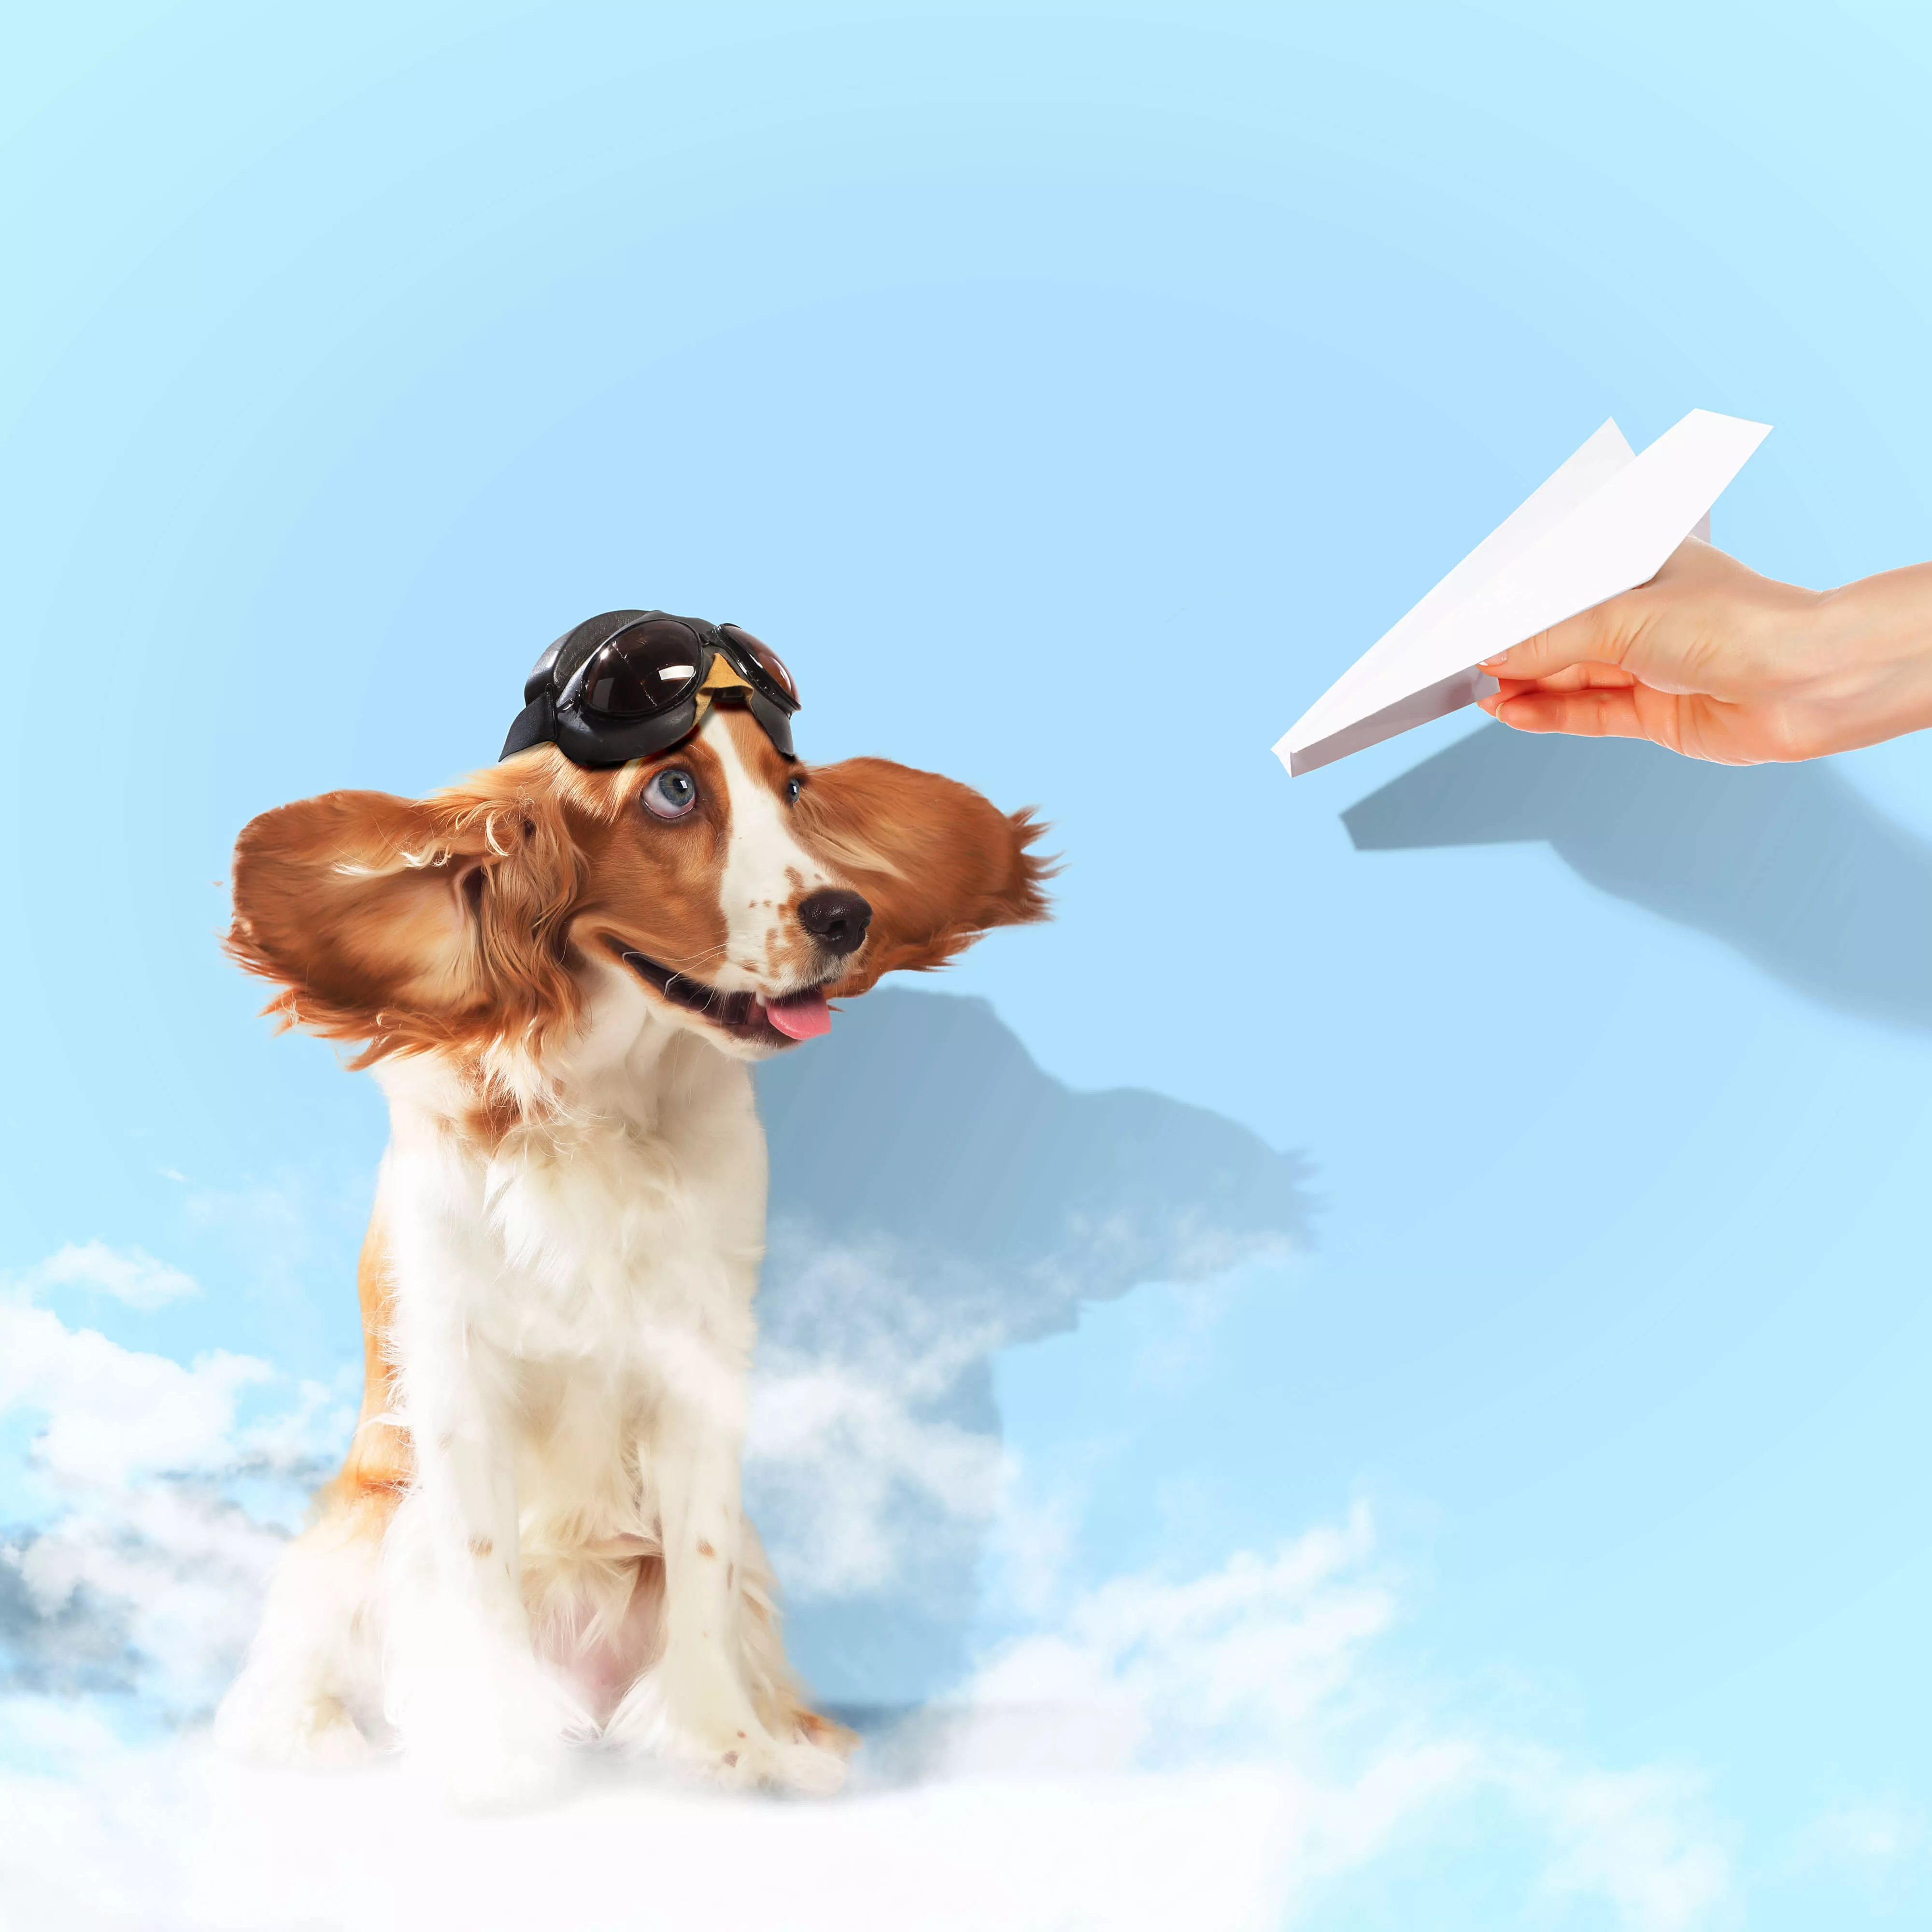 Dog and Paper Airplane